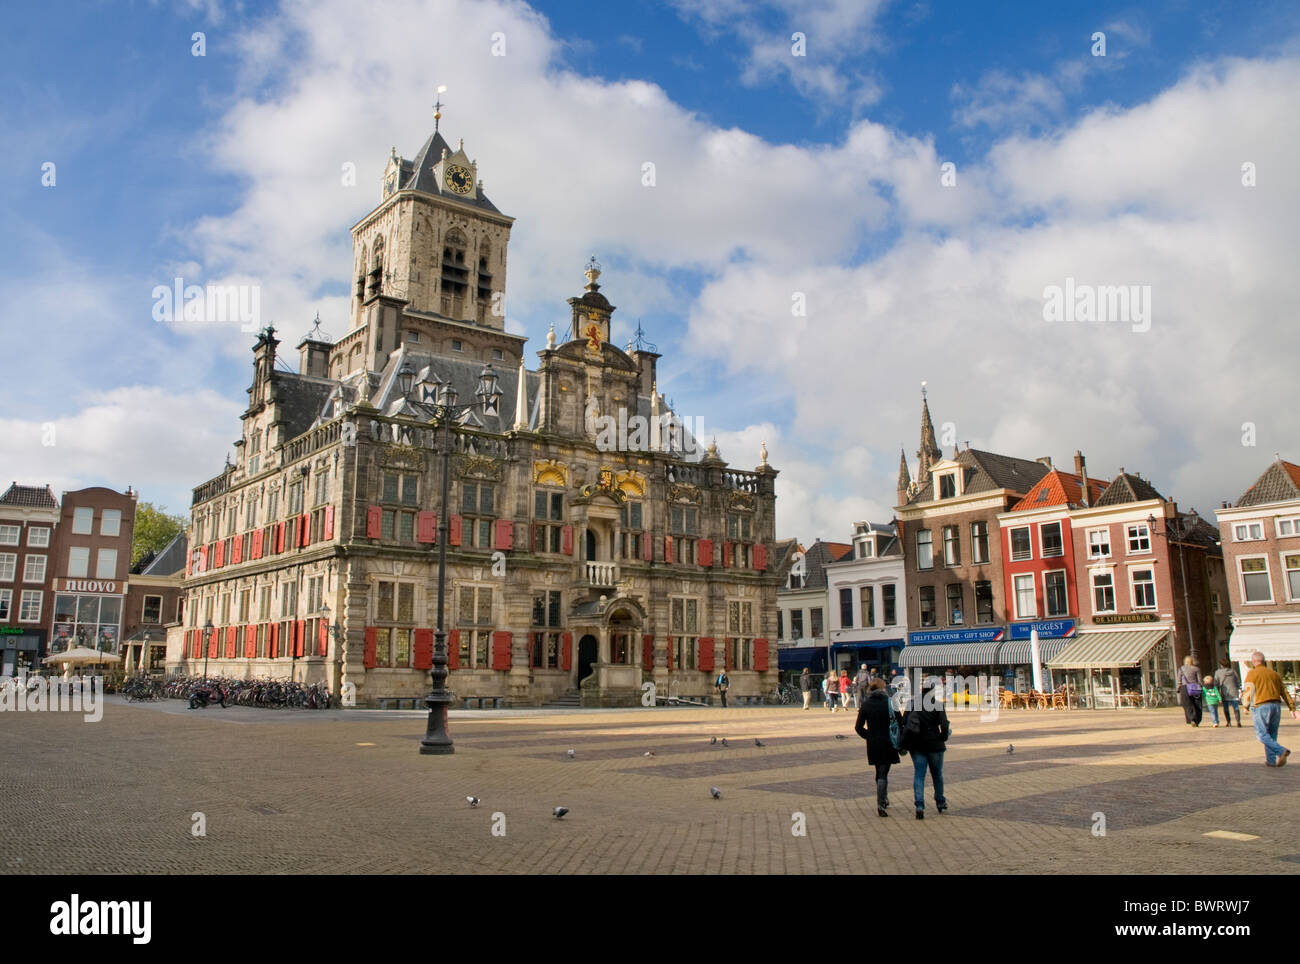 The City Hall in the Dutch town of Delft Stock Photo